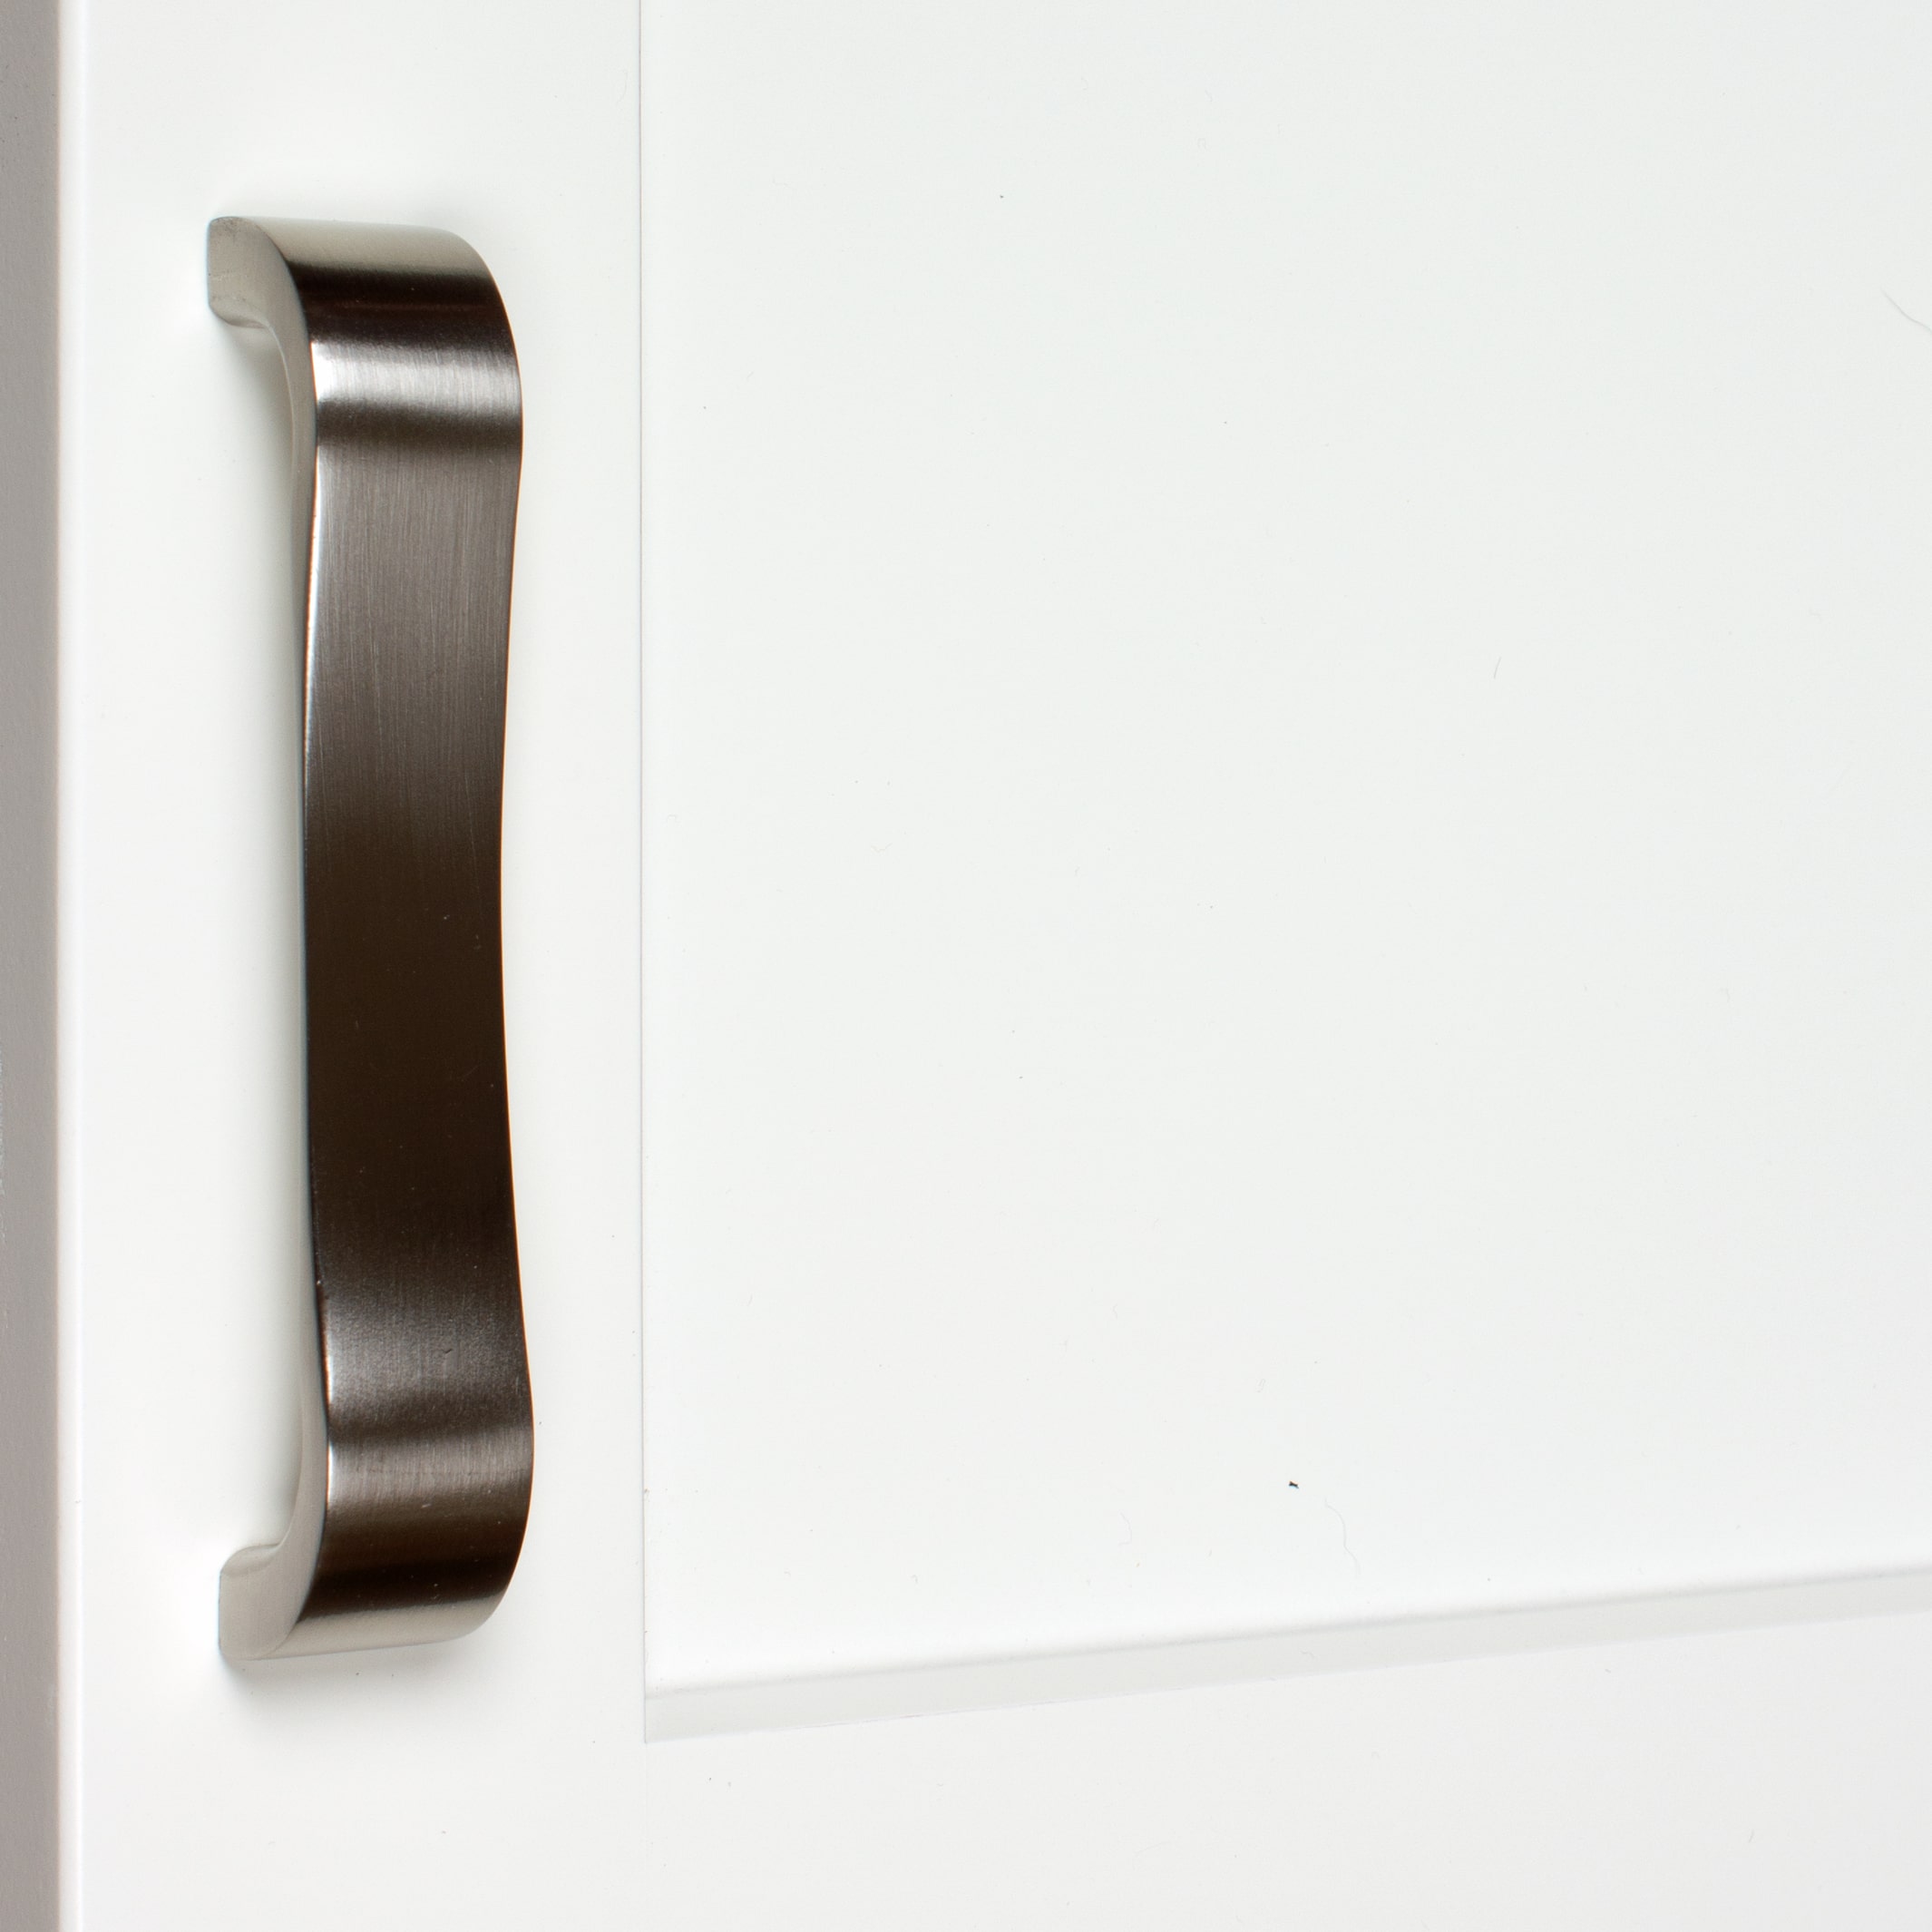 4-1/2 in. Center Smooth Curved Flat Cabinet Pull Handles, Satin Nickel, Pack of 25 - image 2 of 3